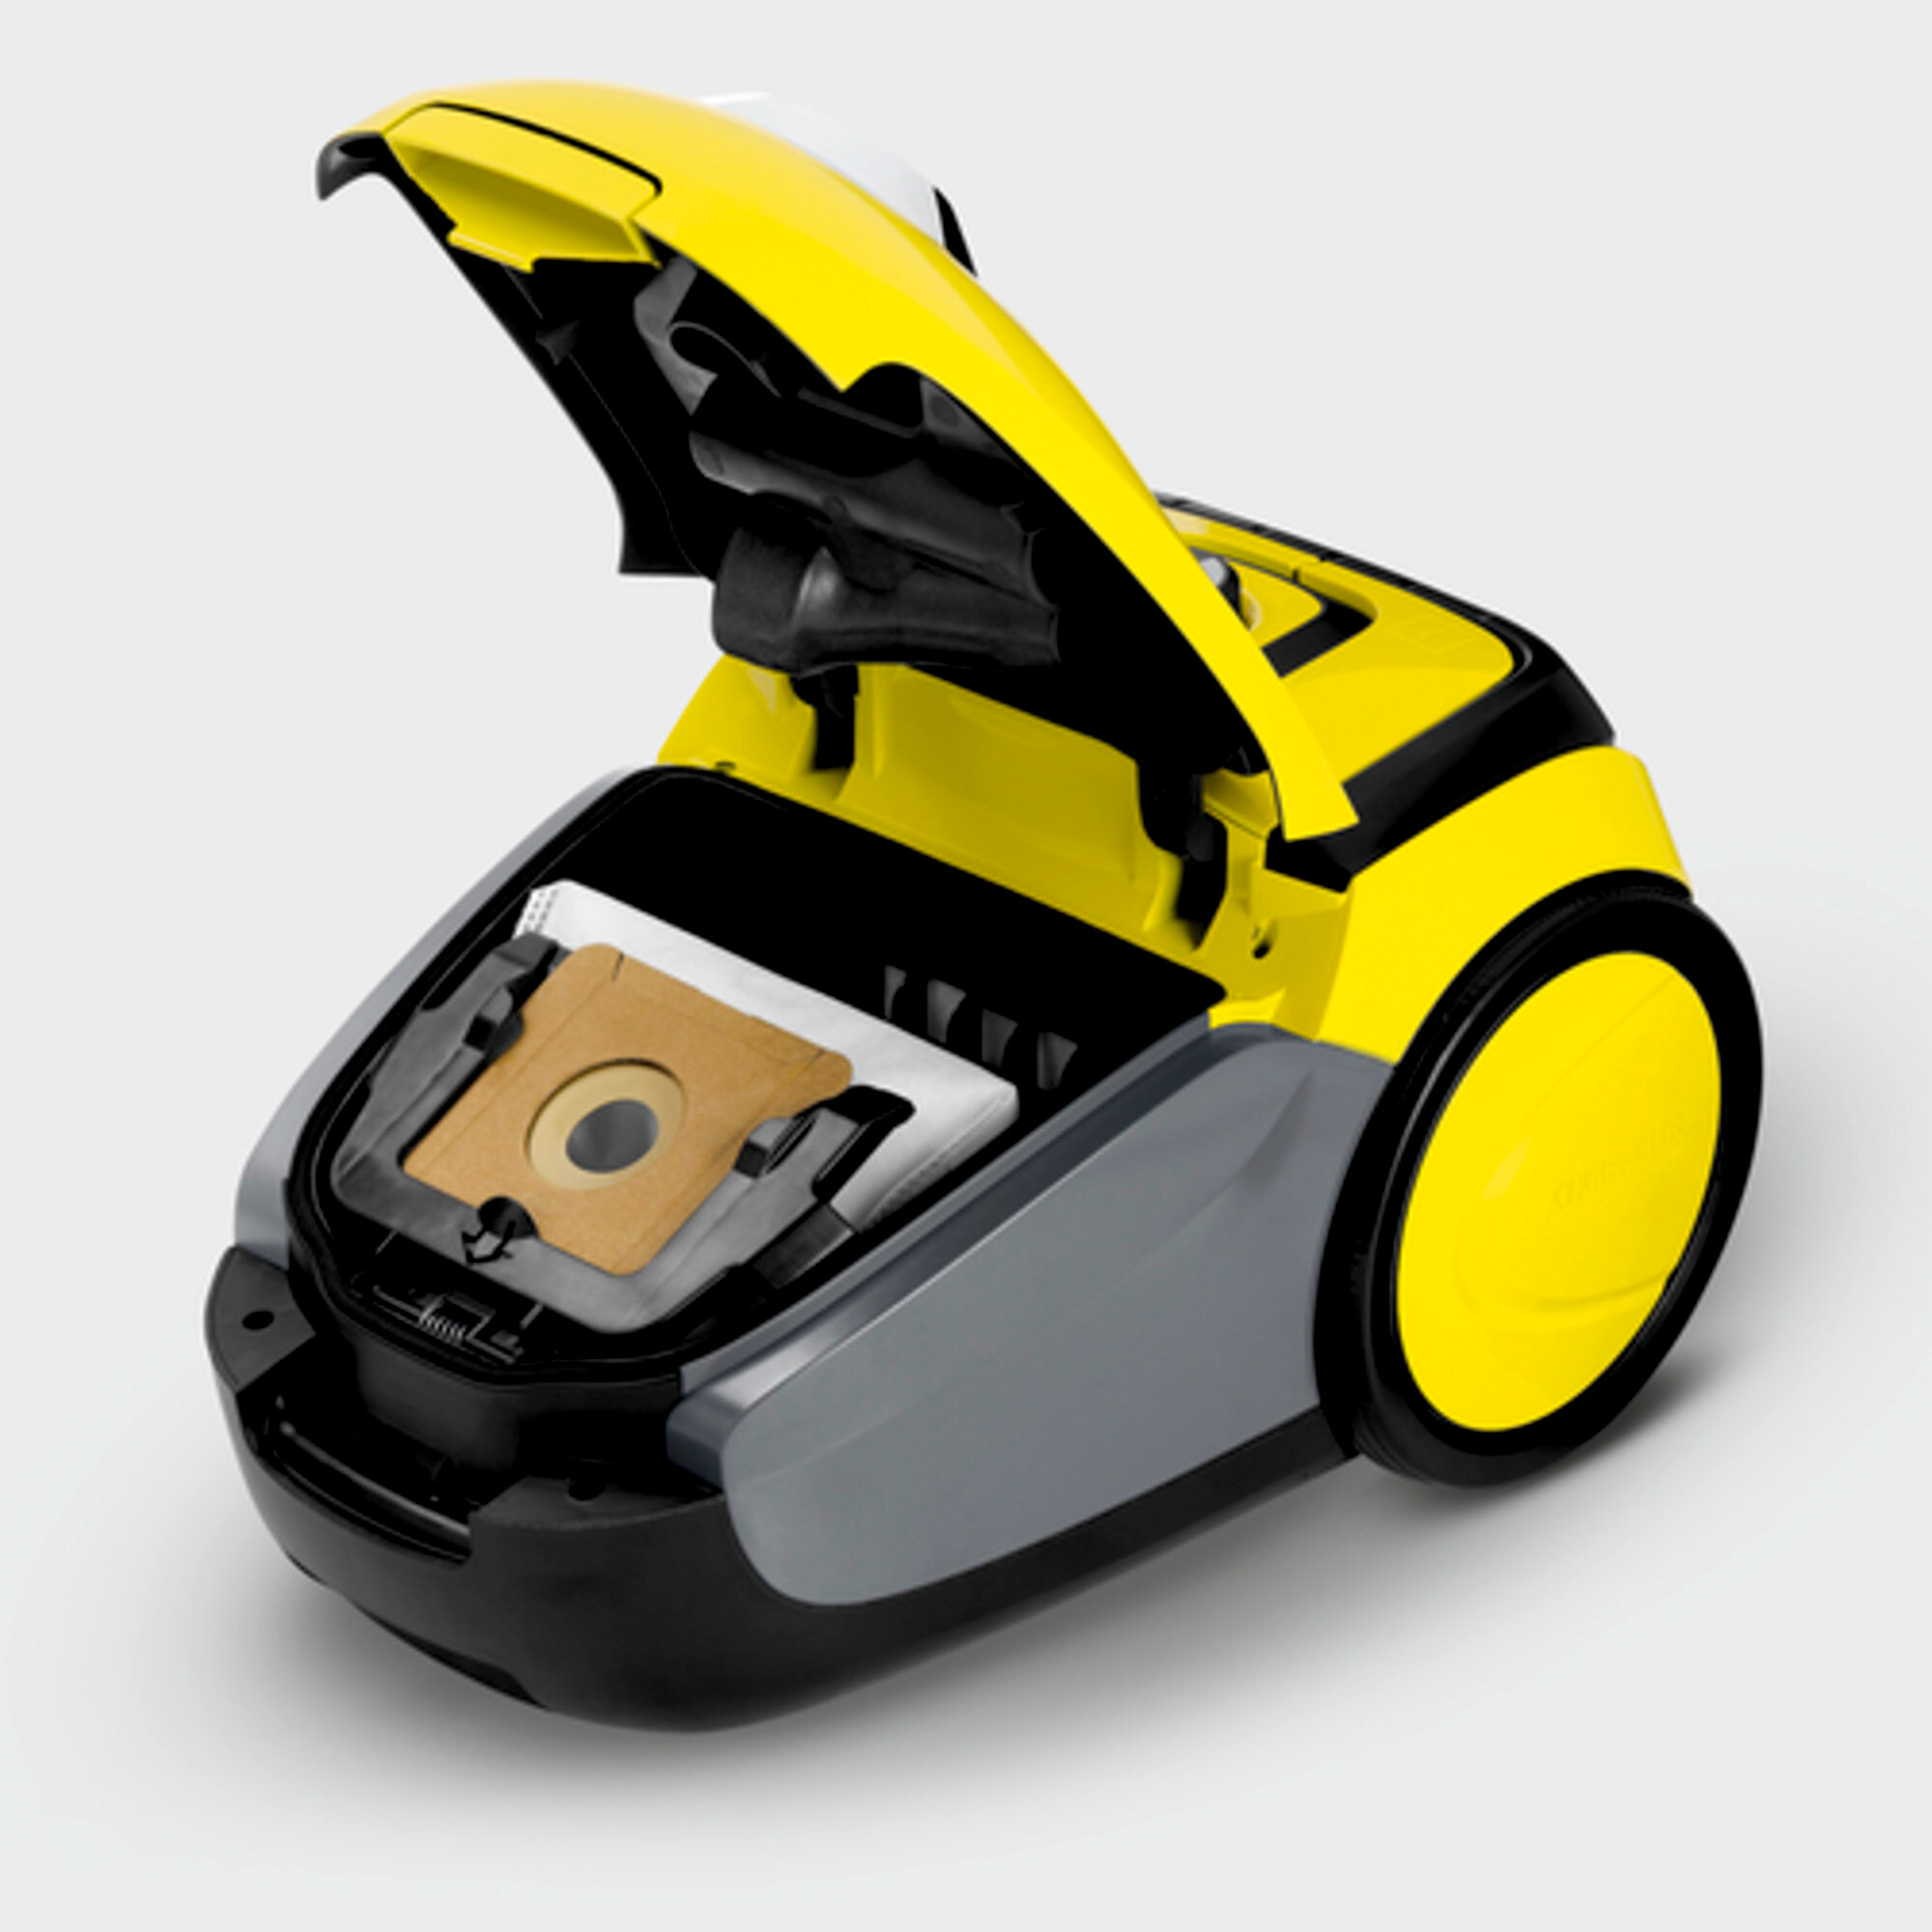 KARCHER VC2 Vacuum Cleaner with Bag